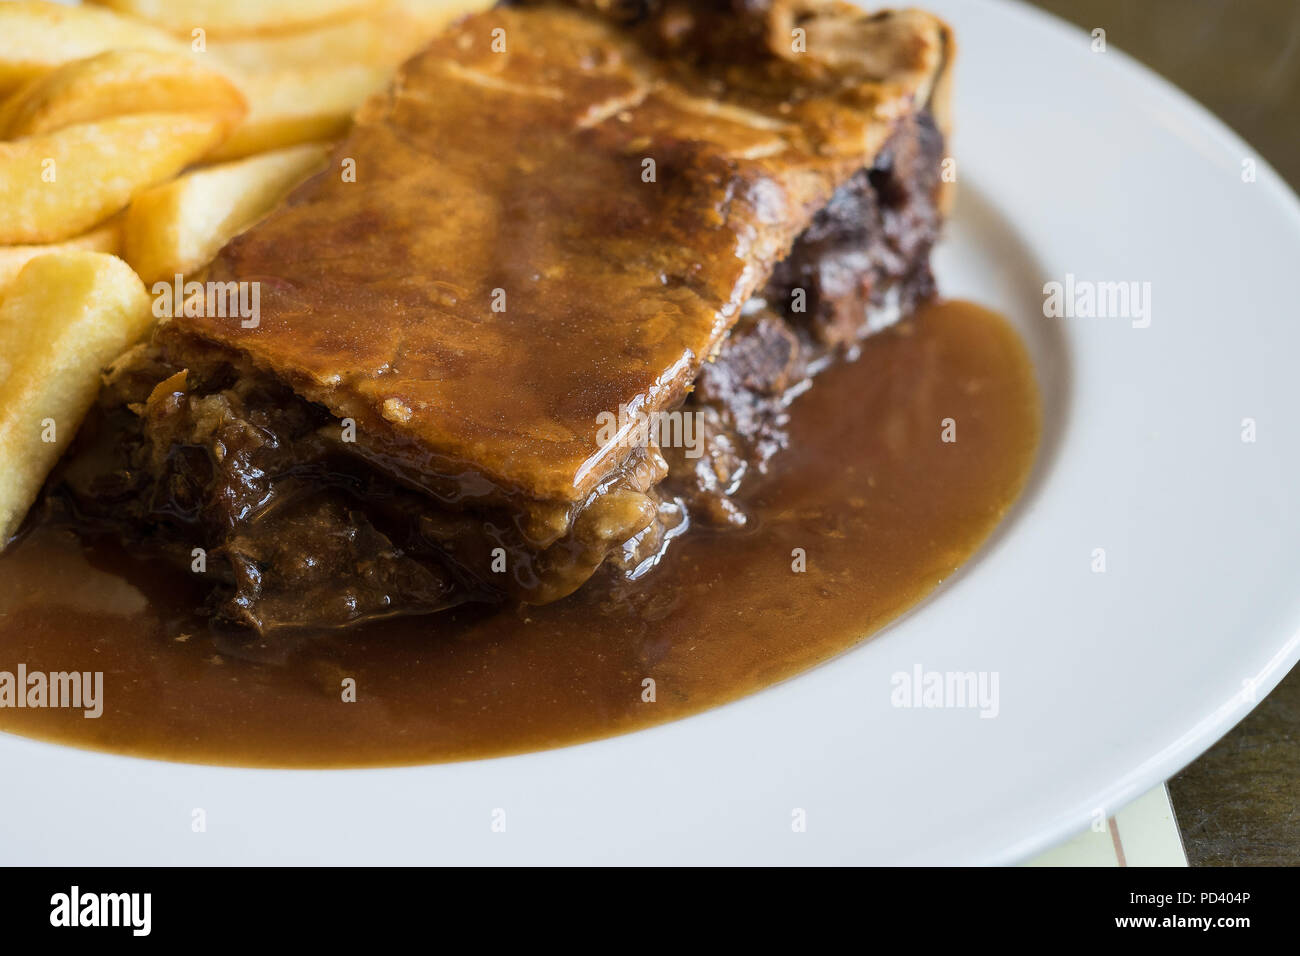 Meat pie with shortcrust pastry, chips and vegetables Stock Photo